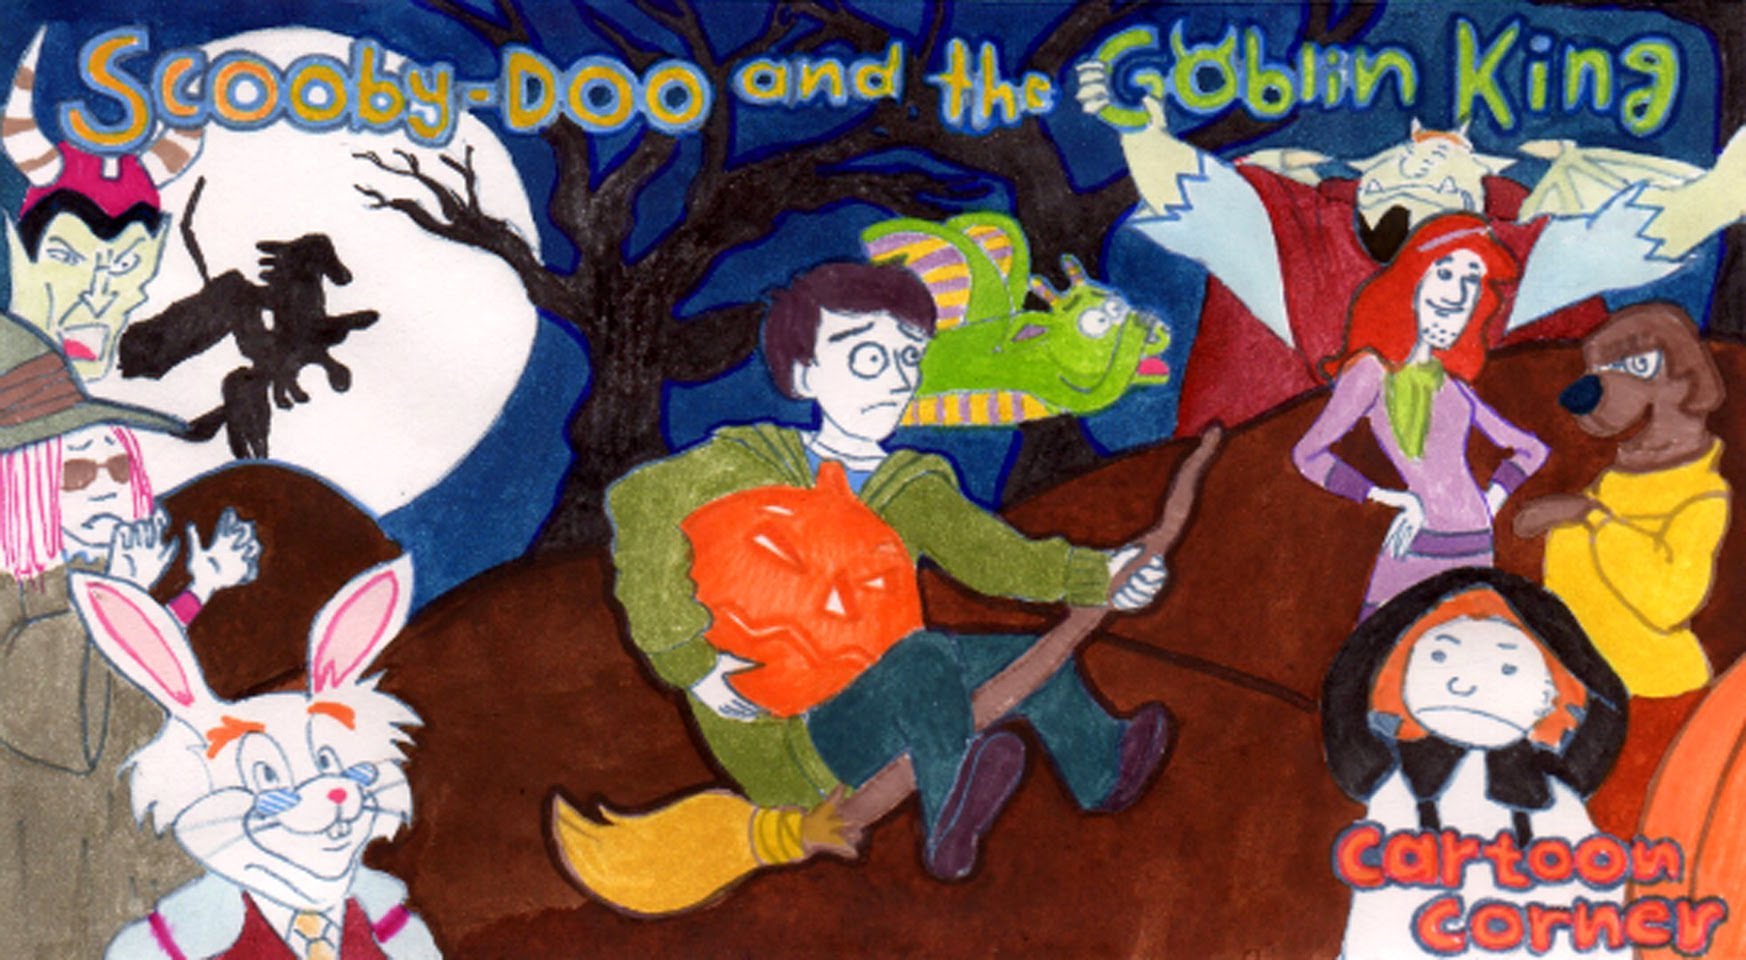 Scooby-Doo And The Goblin King #7